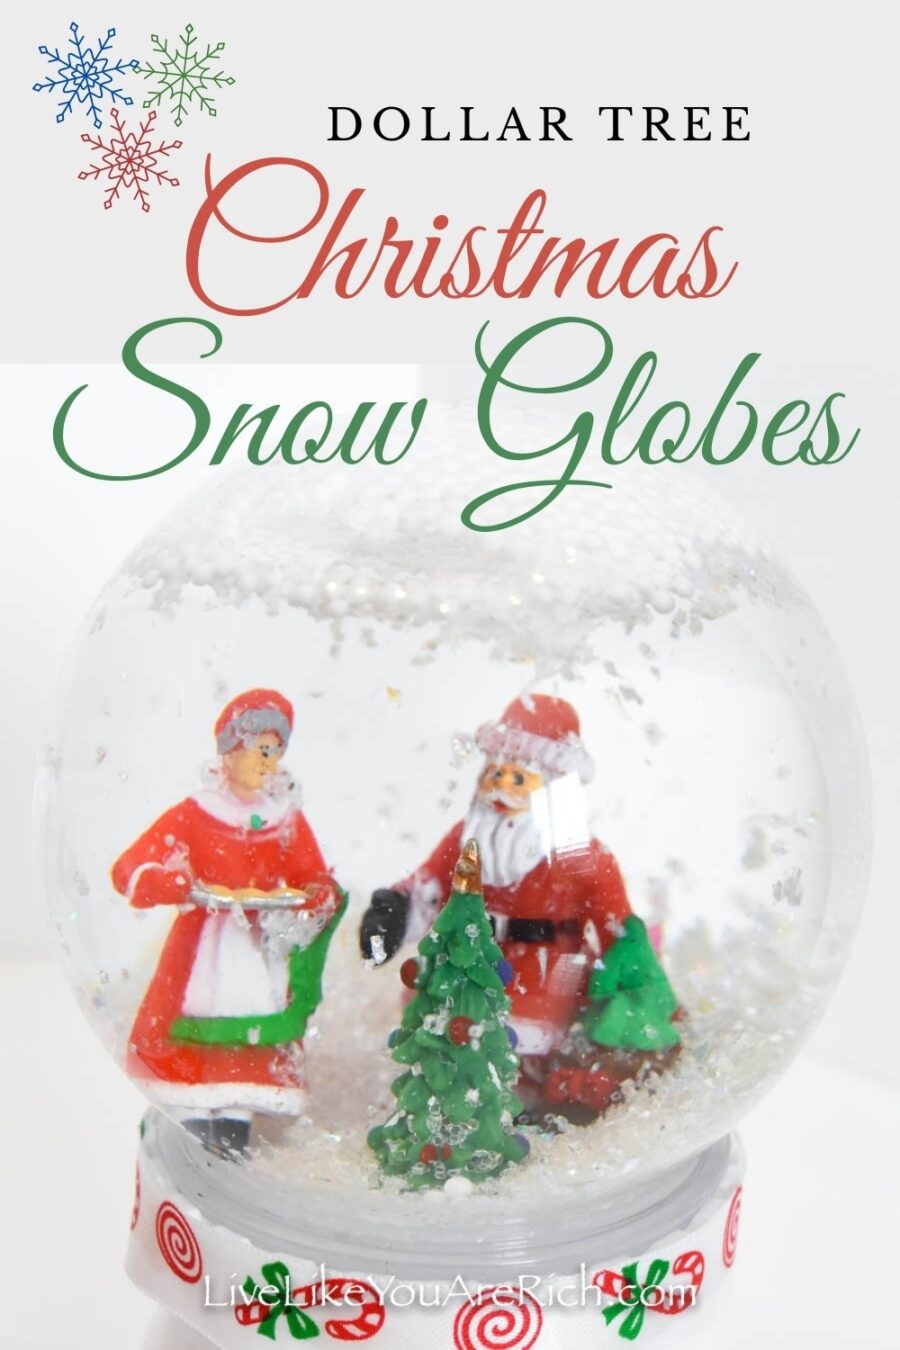 My children LOVE snow globes. Three years ago, Santa brought them each a mini snow globe. It was easily one of their favorite gifts that Christmas. This really is a great craft to do as a family.